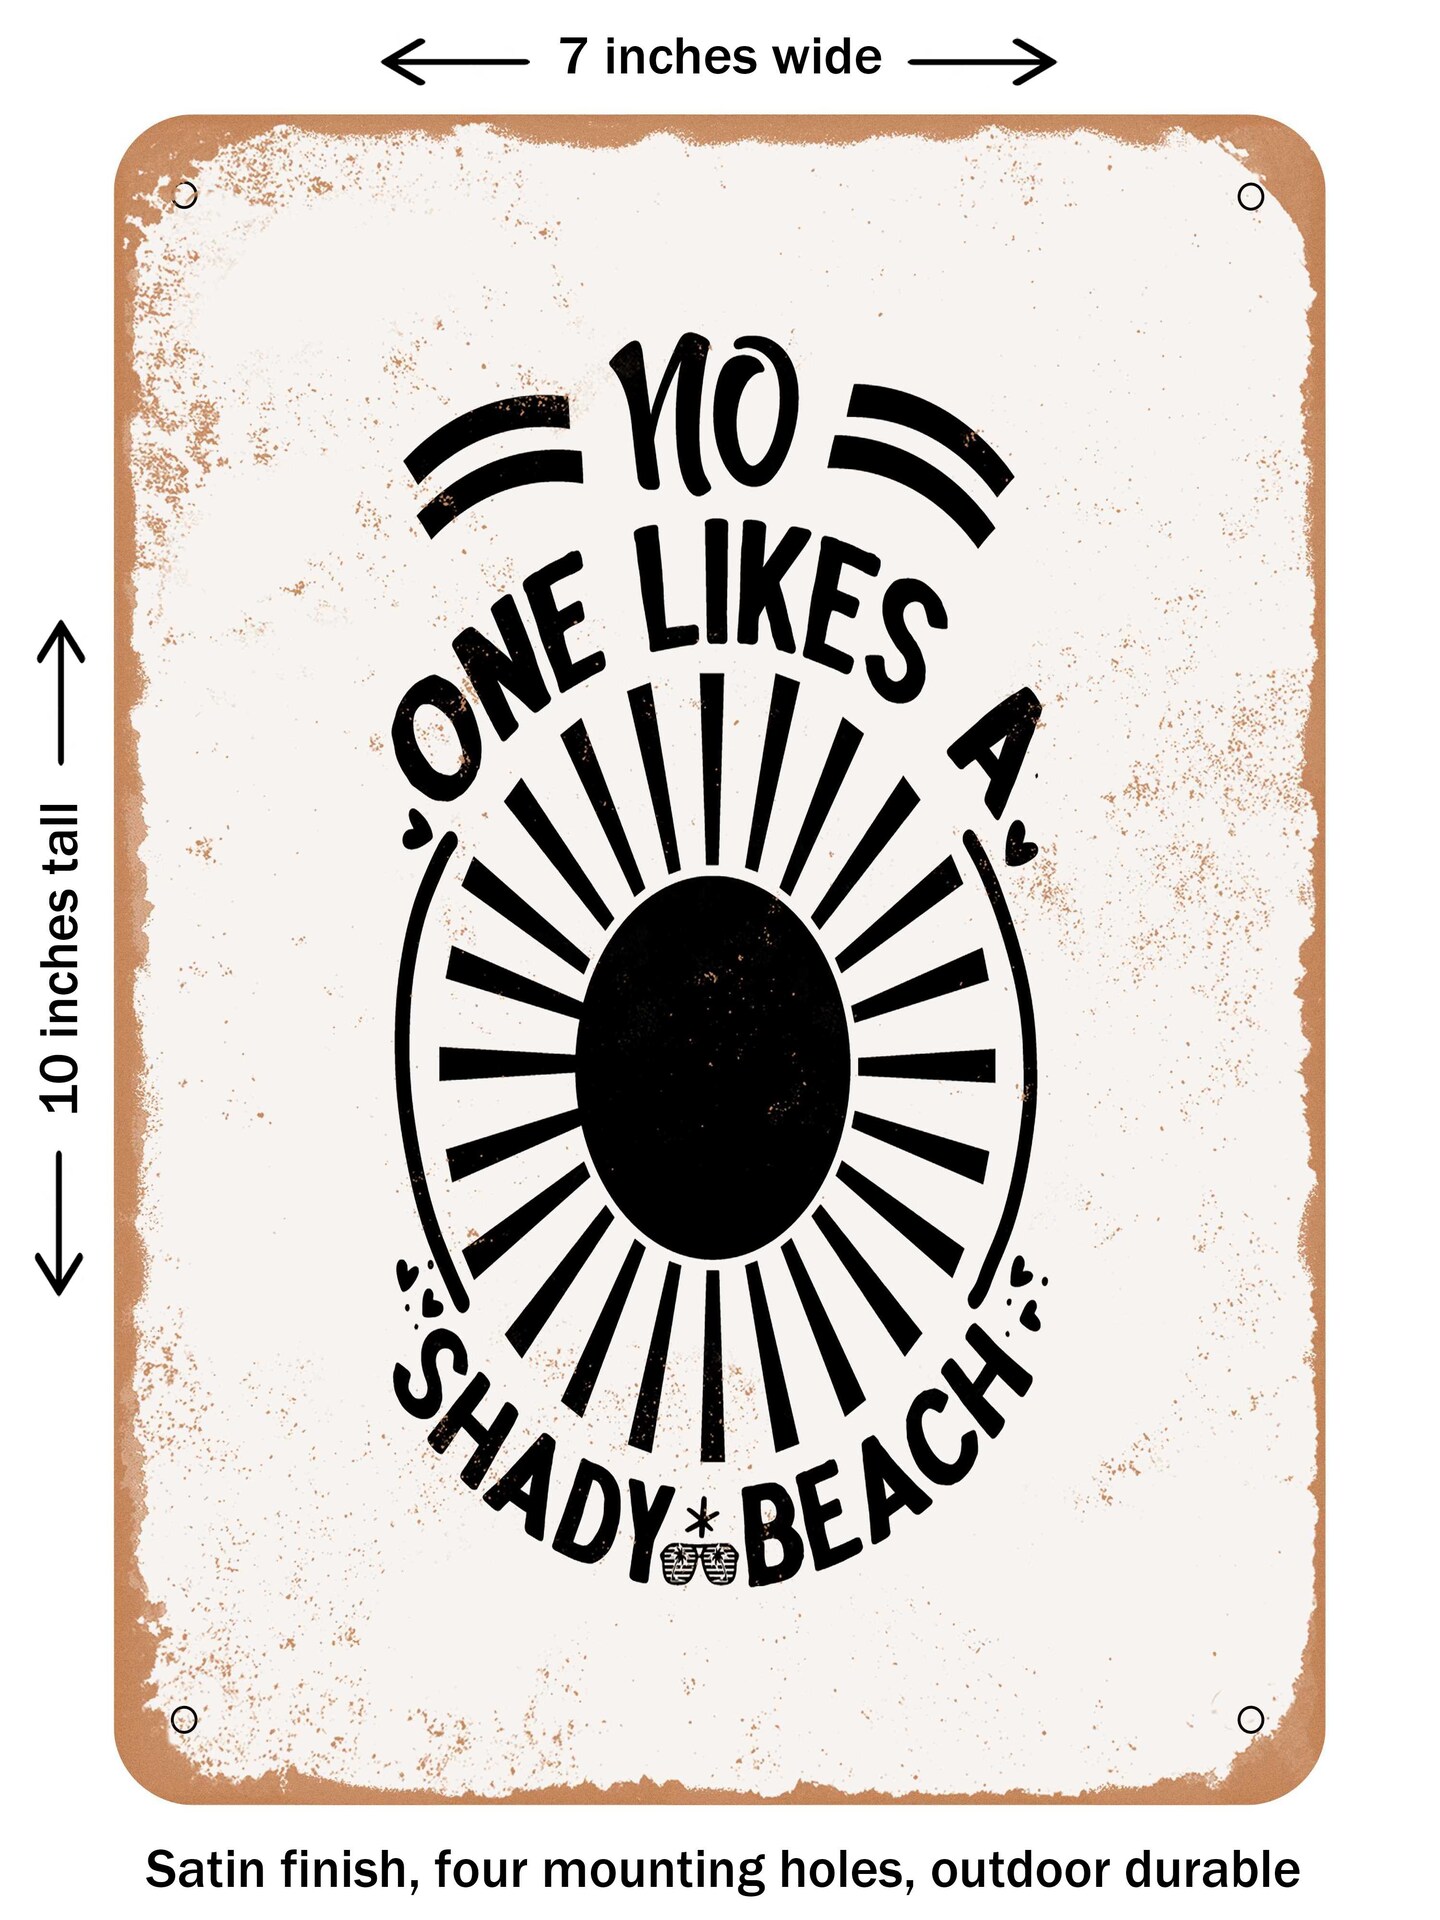 DECORATIVE METAL SIGN - No One Likes a Shady Beach  - Vintage Rusty Look